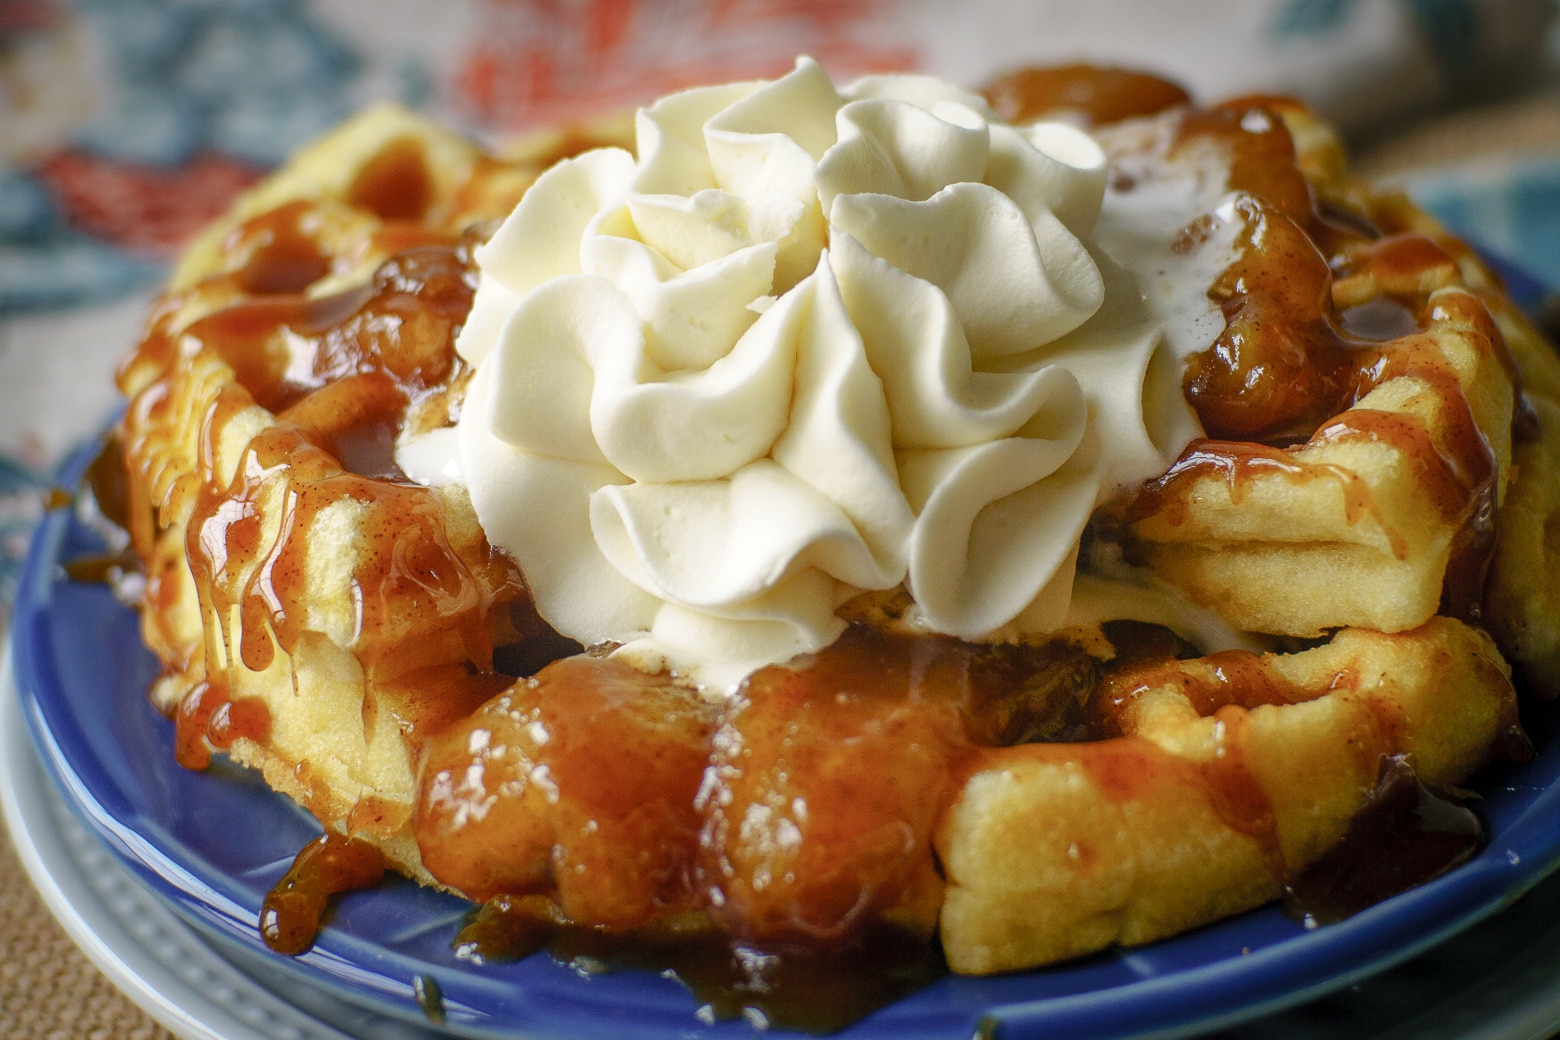 Caramelized banana waffles : Caramelized bananas will turn your weekend waffles to off the chart amazing thanks to a secret ingredient in the waffle recipe!